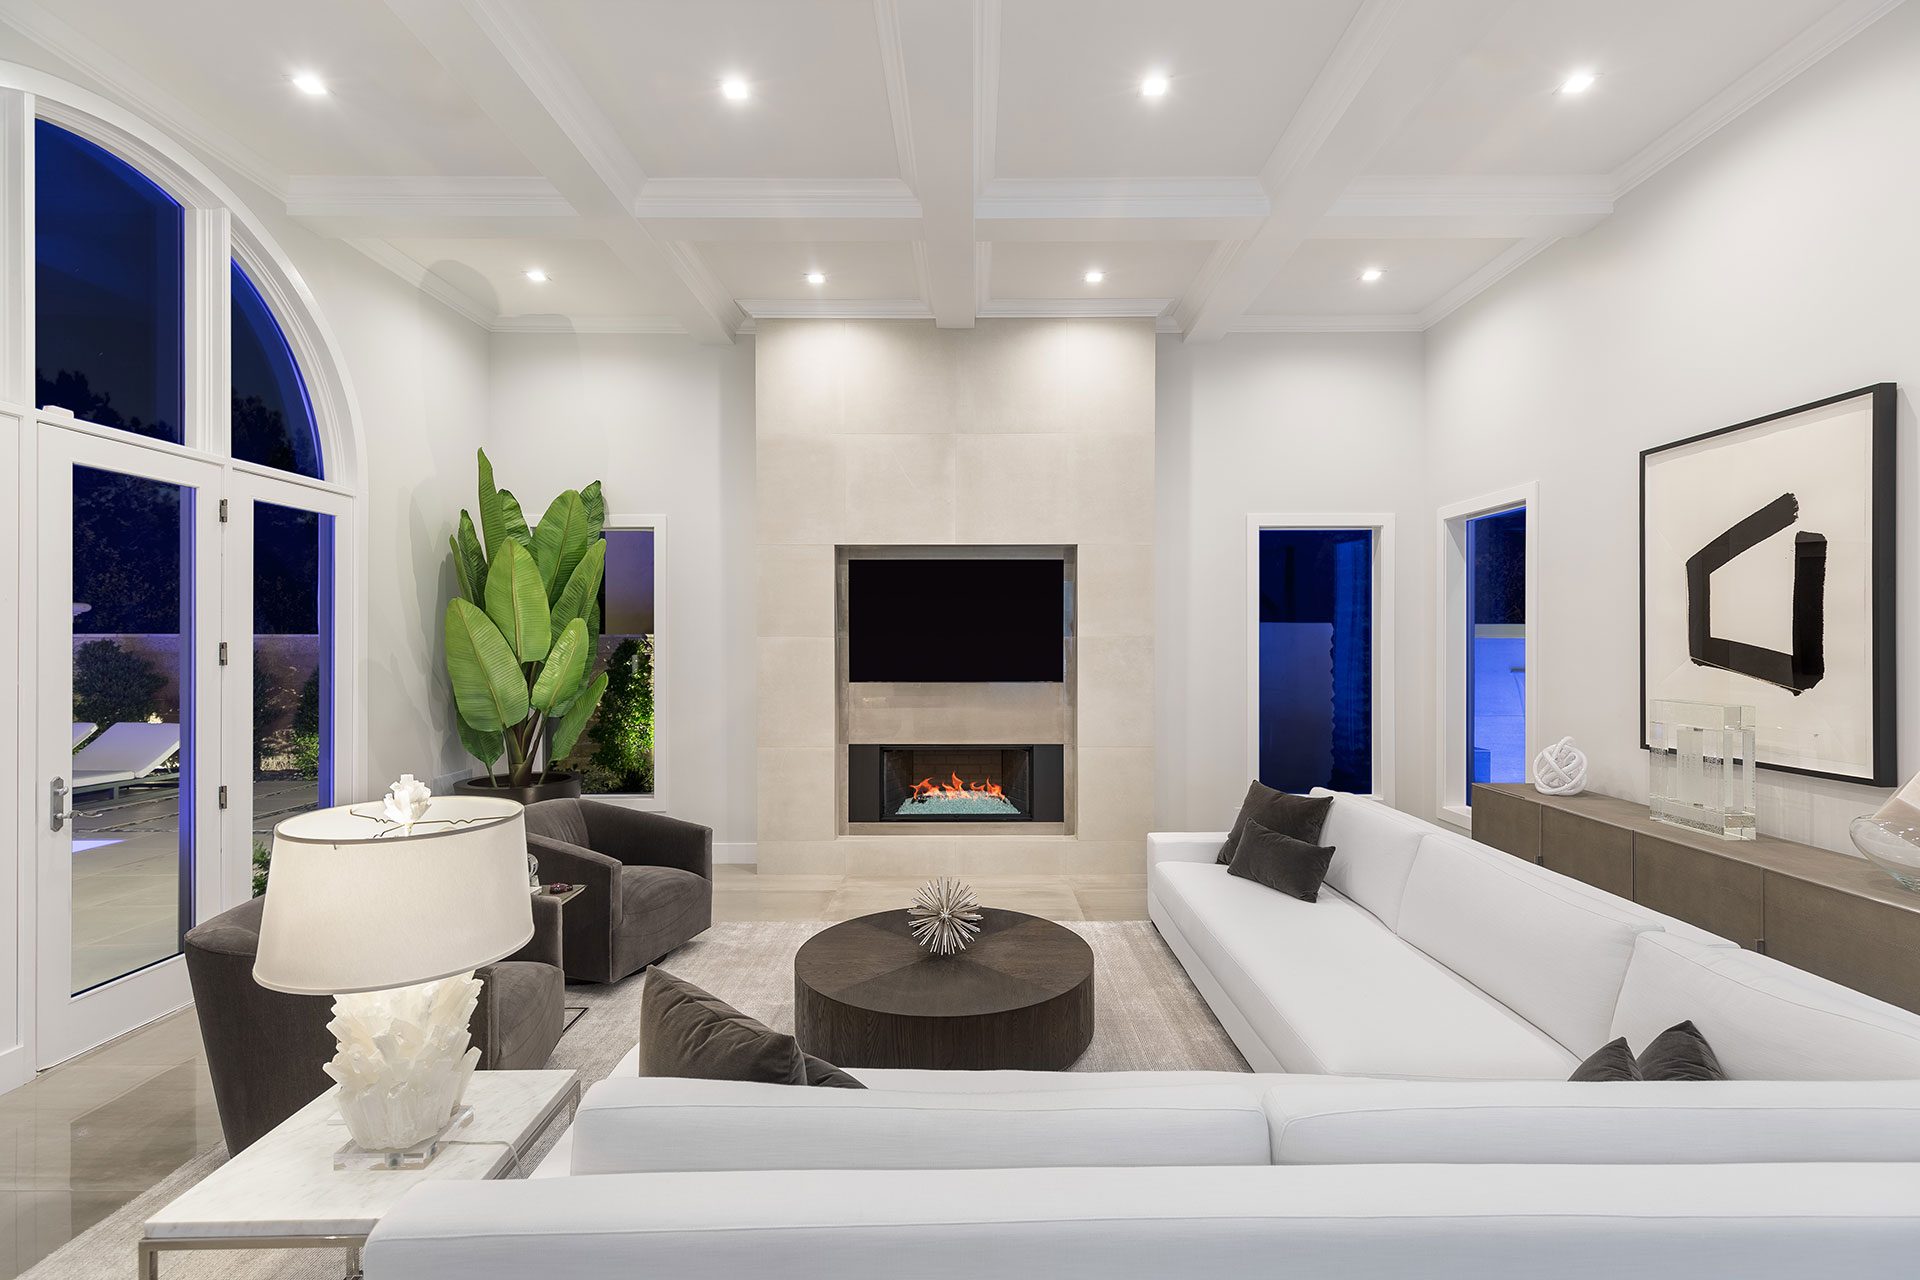 Living room with white walls and ceiling with a couch back in the foreground and a plat-panel tv and fireplace in the background, glass doors to patio chairs on the left and modern black-and-white art on the left wall.